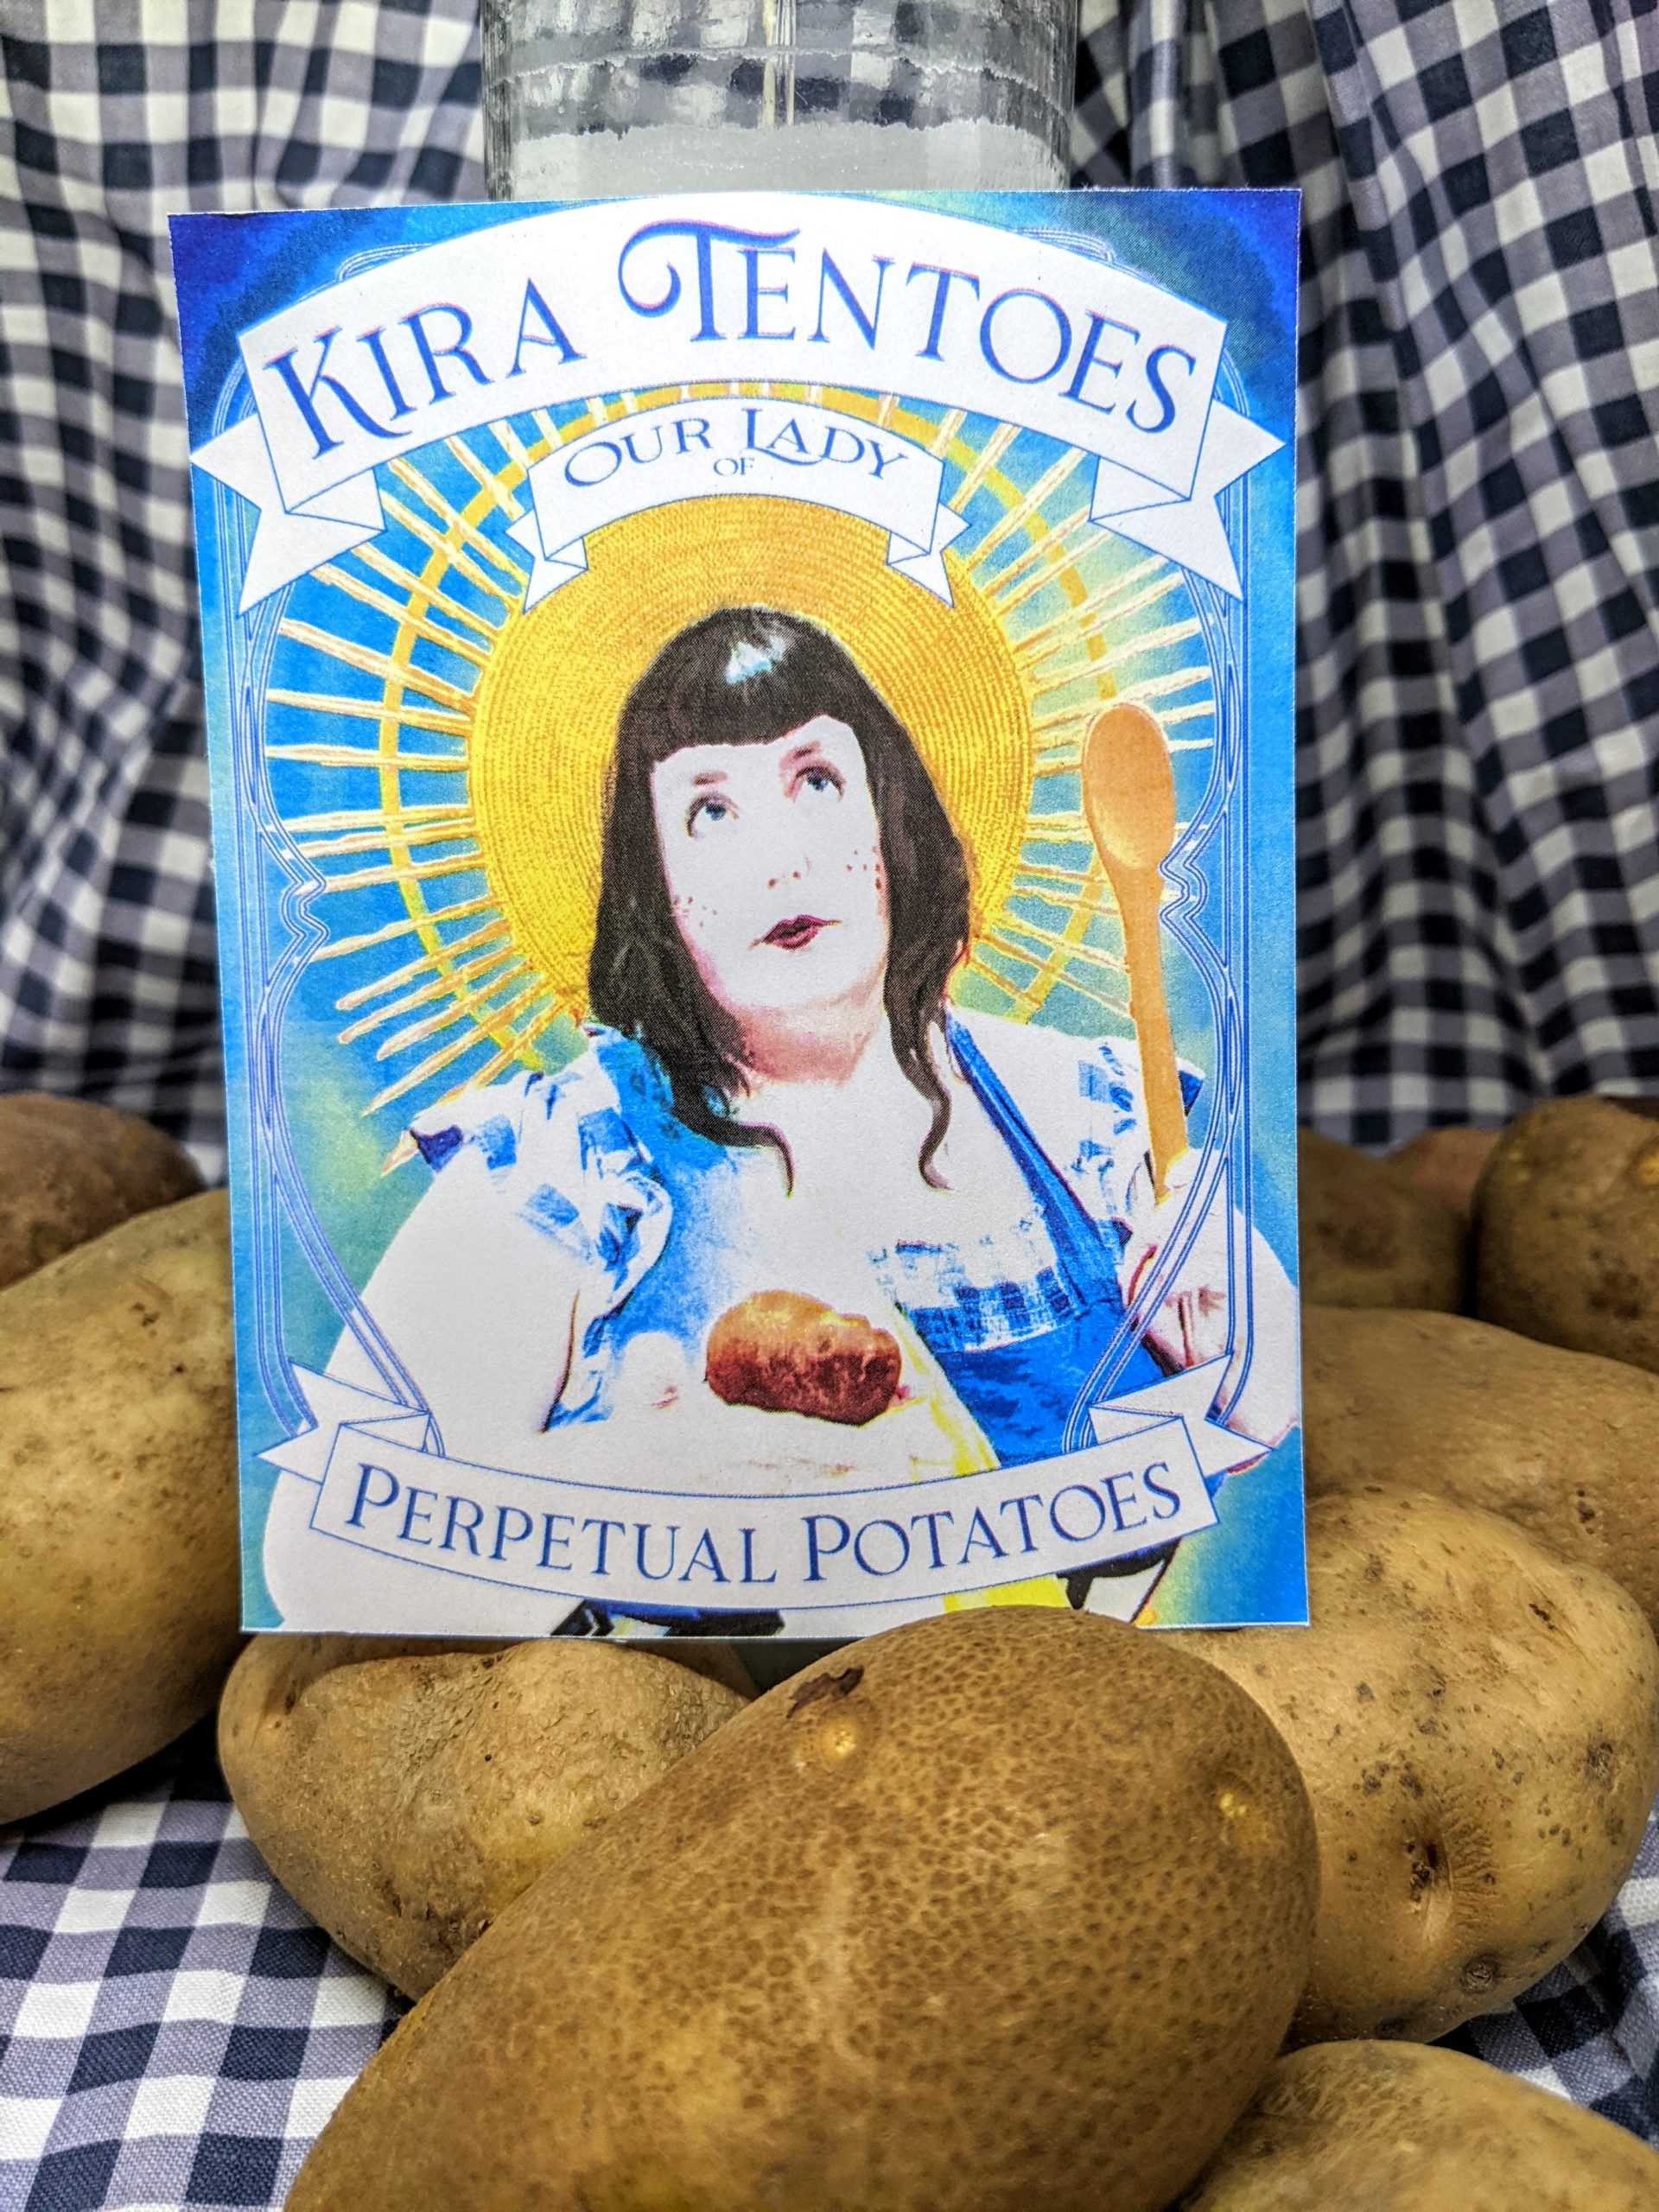 Our Lady of Perpetual Potatoes – Kira Tentoes – Sticker